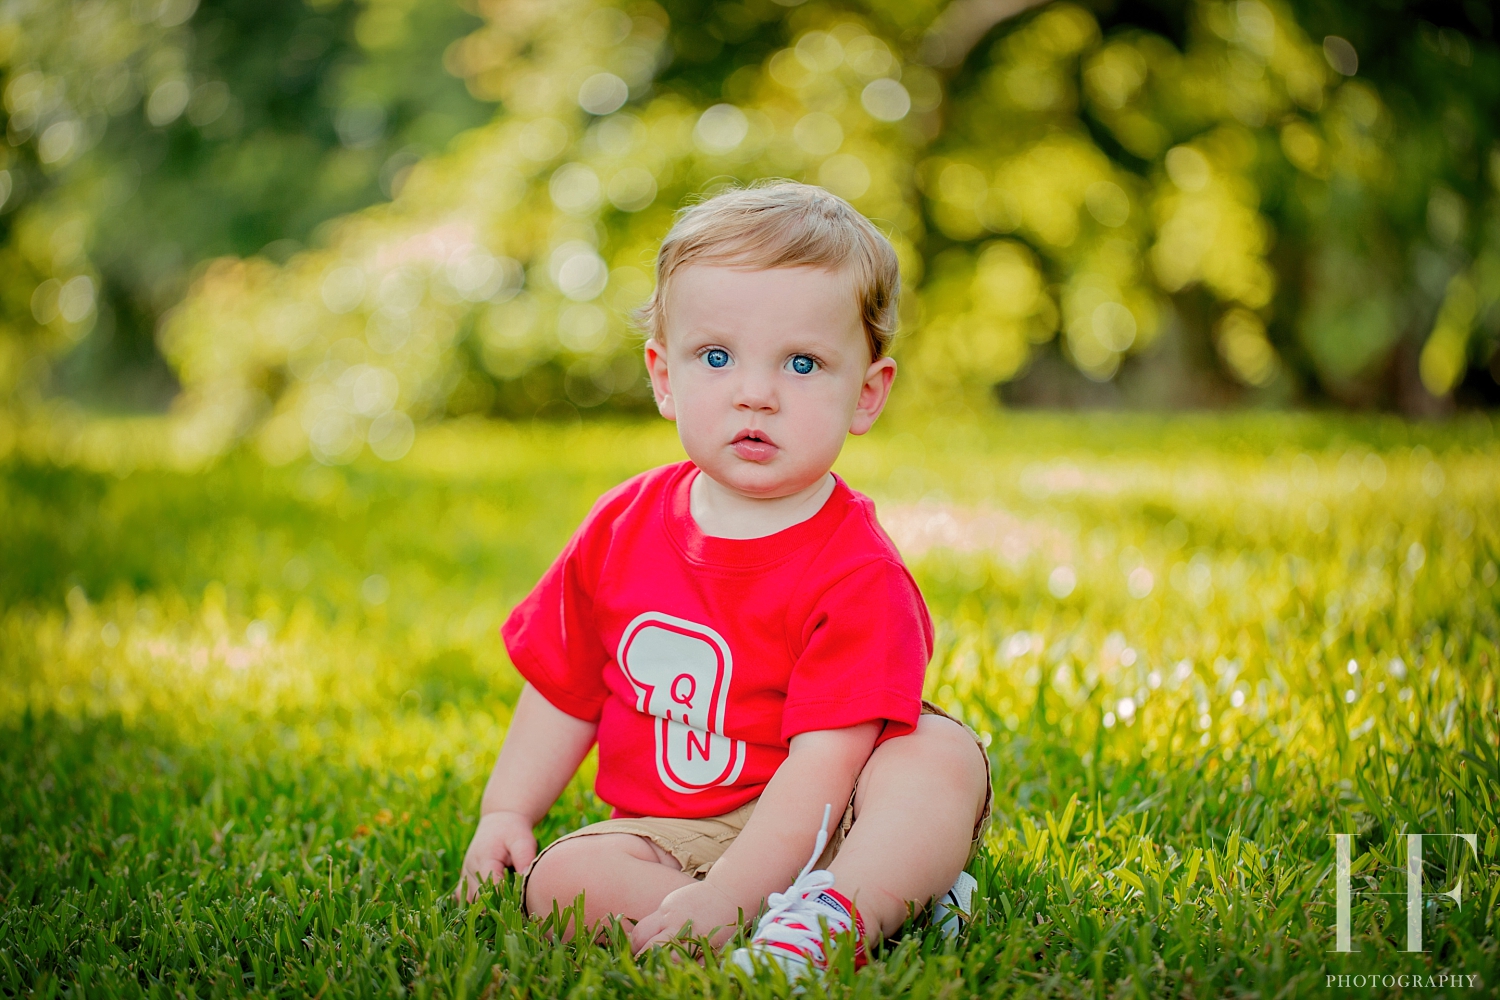 Hf photography, downtown, Lake charles, Louisiana, Cake smash, first birthday, Lake charels photographer, Child photographer, family photographer, oak tree, red wagon photos, one year old, let them eat cake, quinn,